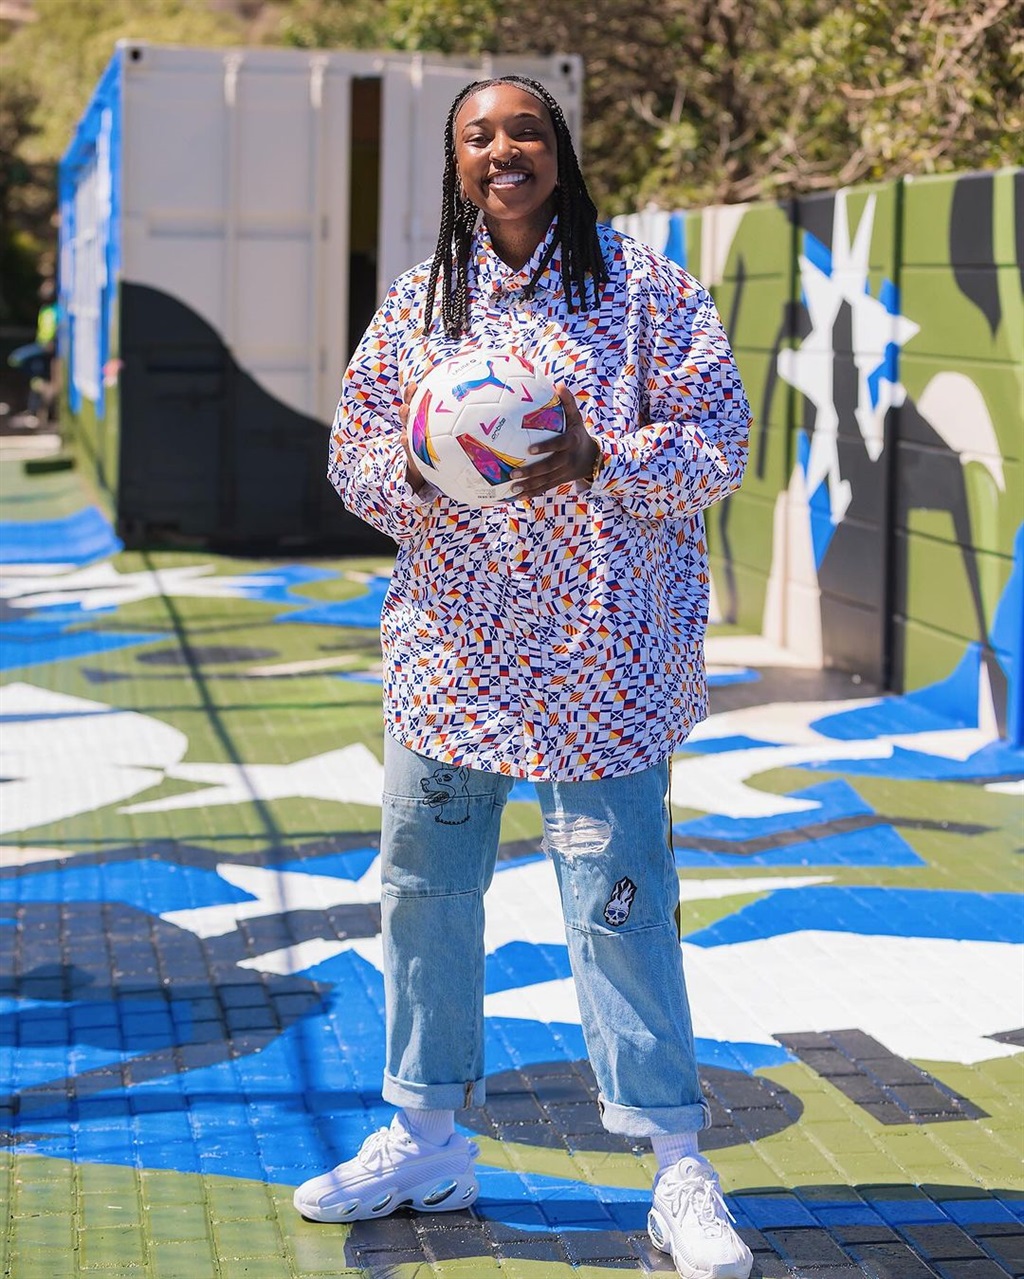 Renowned South African visual artist, Karabo Poppy recently unveiled a series of murals surrounding five-a-side courts in collaboration with EA Sports & LaLiga.